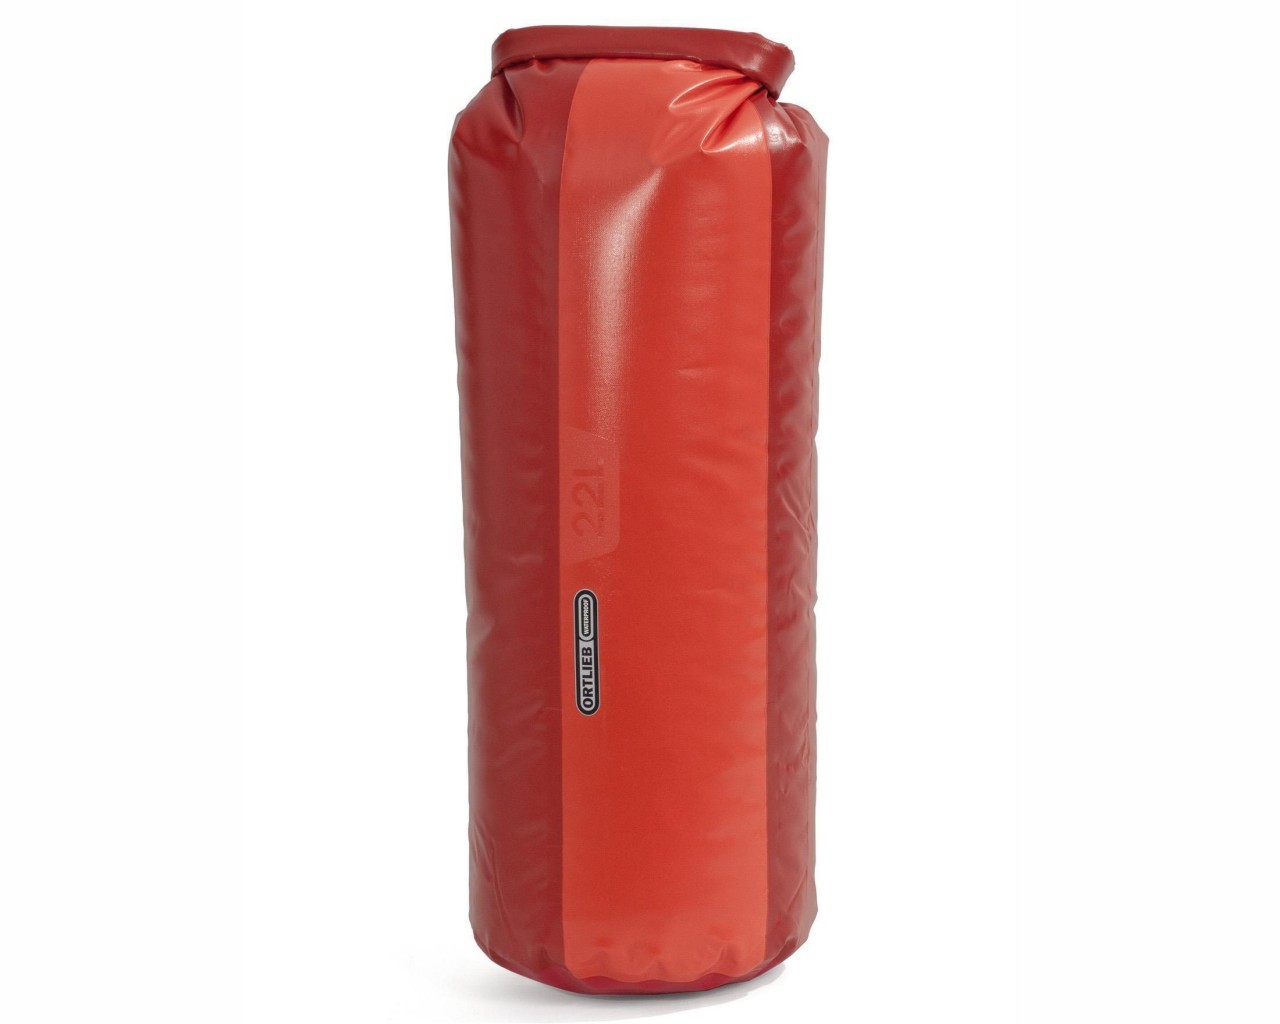 Ortlieb Packsack PD350 - 13 liter | cranberry-signalrot